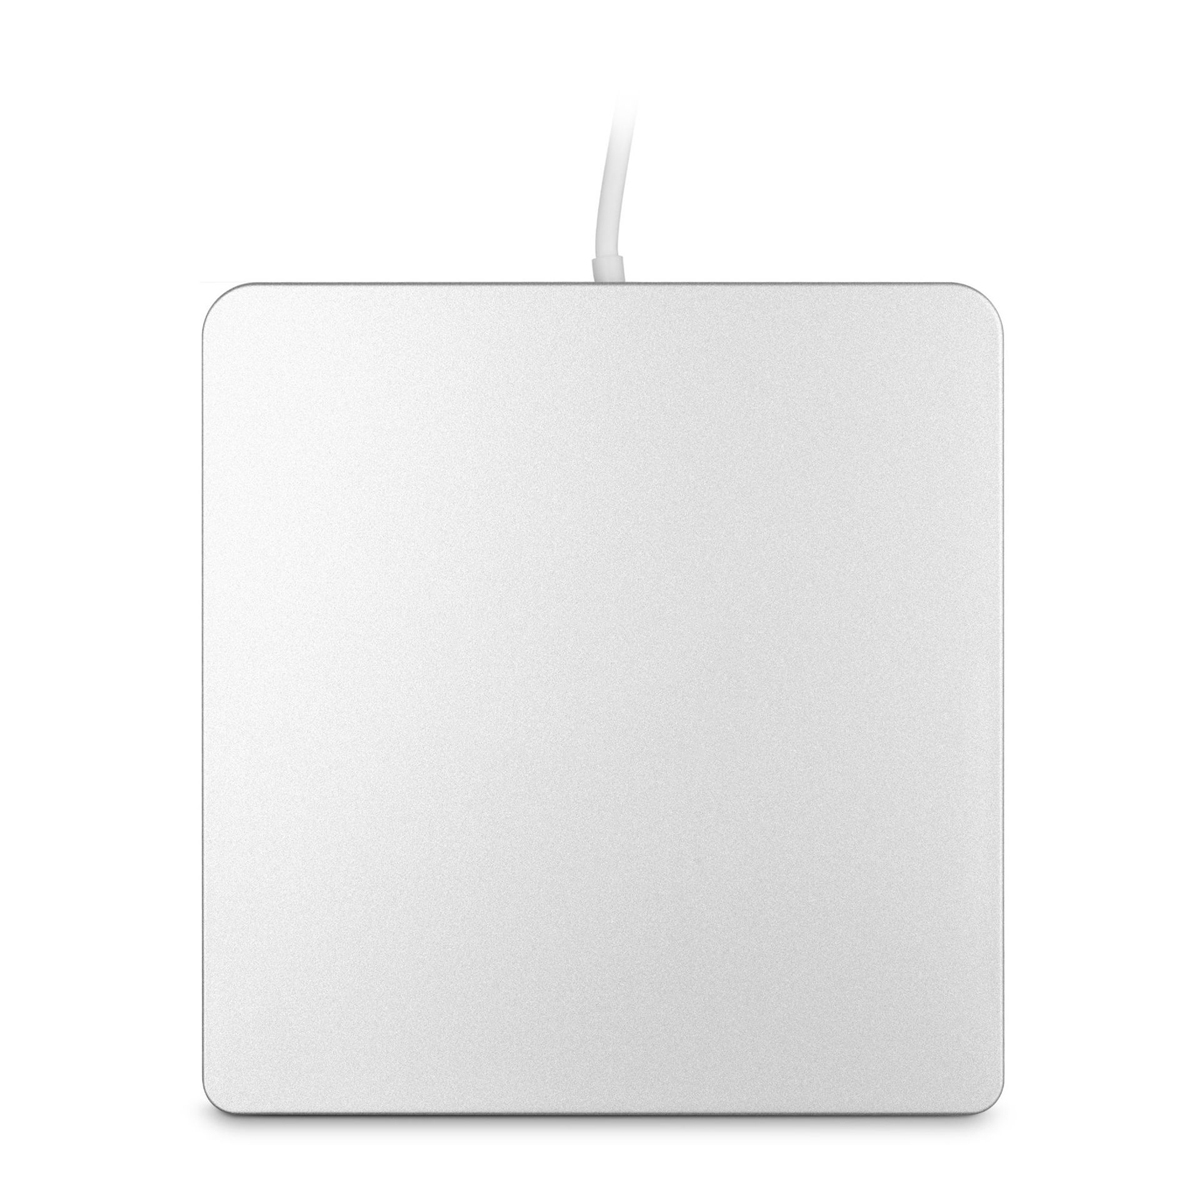 Portable-USB-30-Silver-External-DVD-RW-Max24X-High-speed-Data-Transmission-for-Win-XP-Win-7-Win-8-Wi-1701692-5